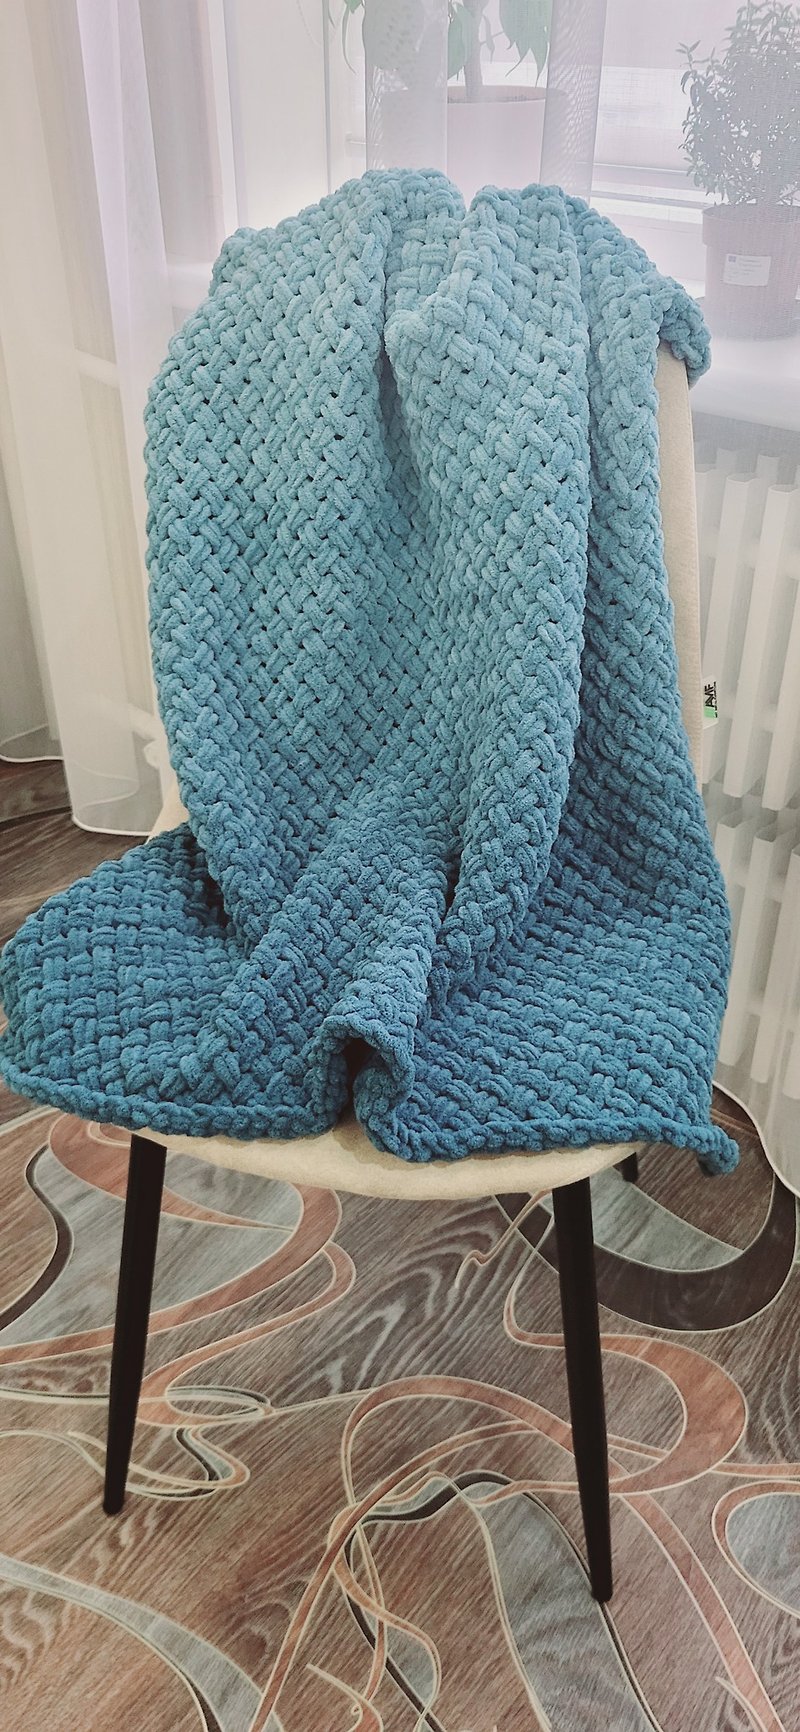 knitted handmade blanket (plaid) ombre mint color, size 85x85 - 被/毛毯 - 聚酯纖維 